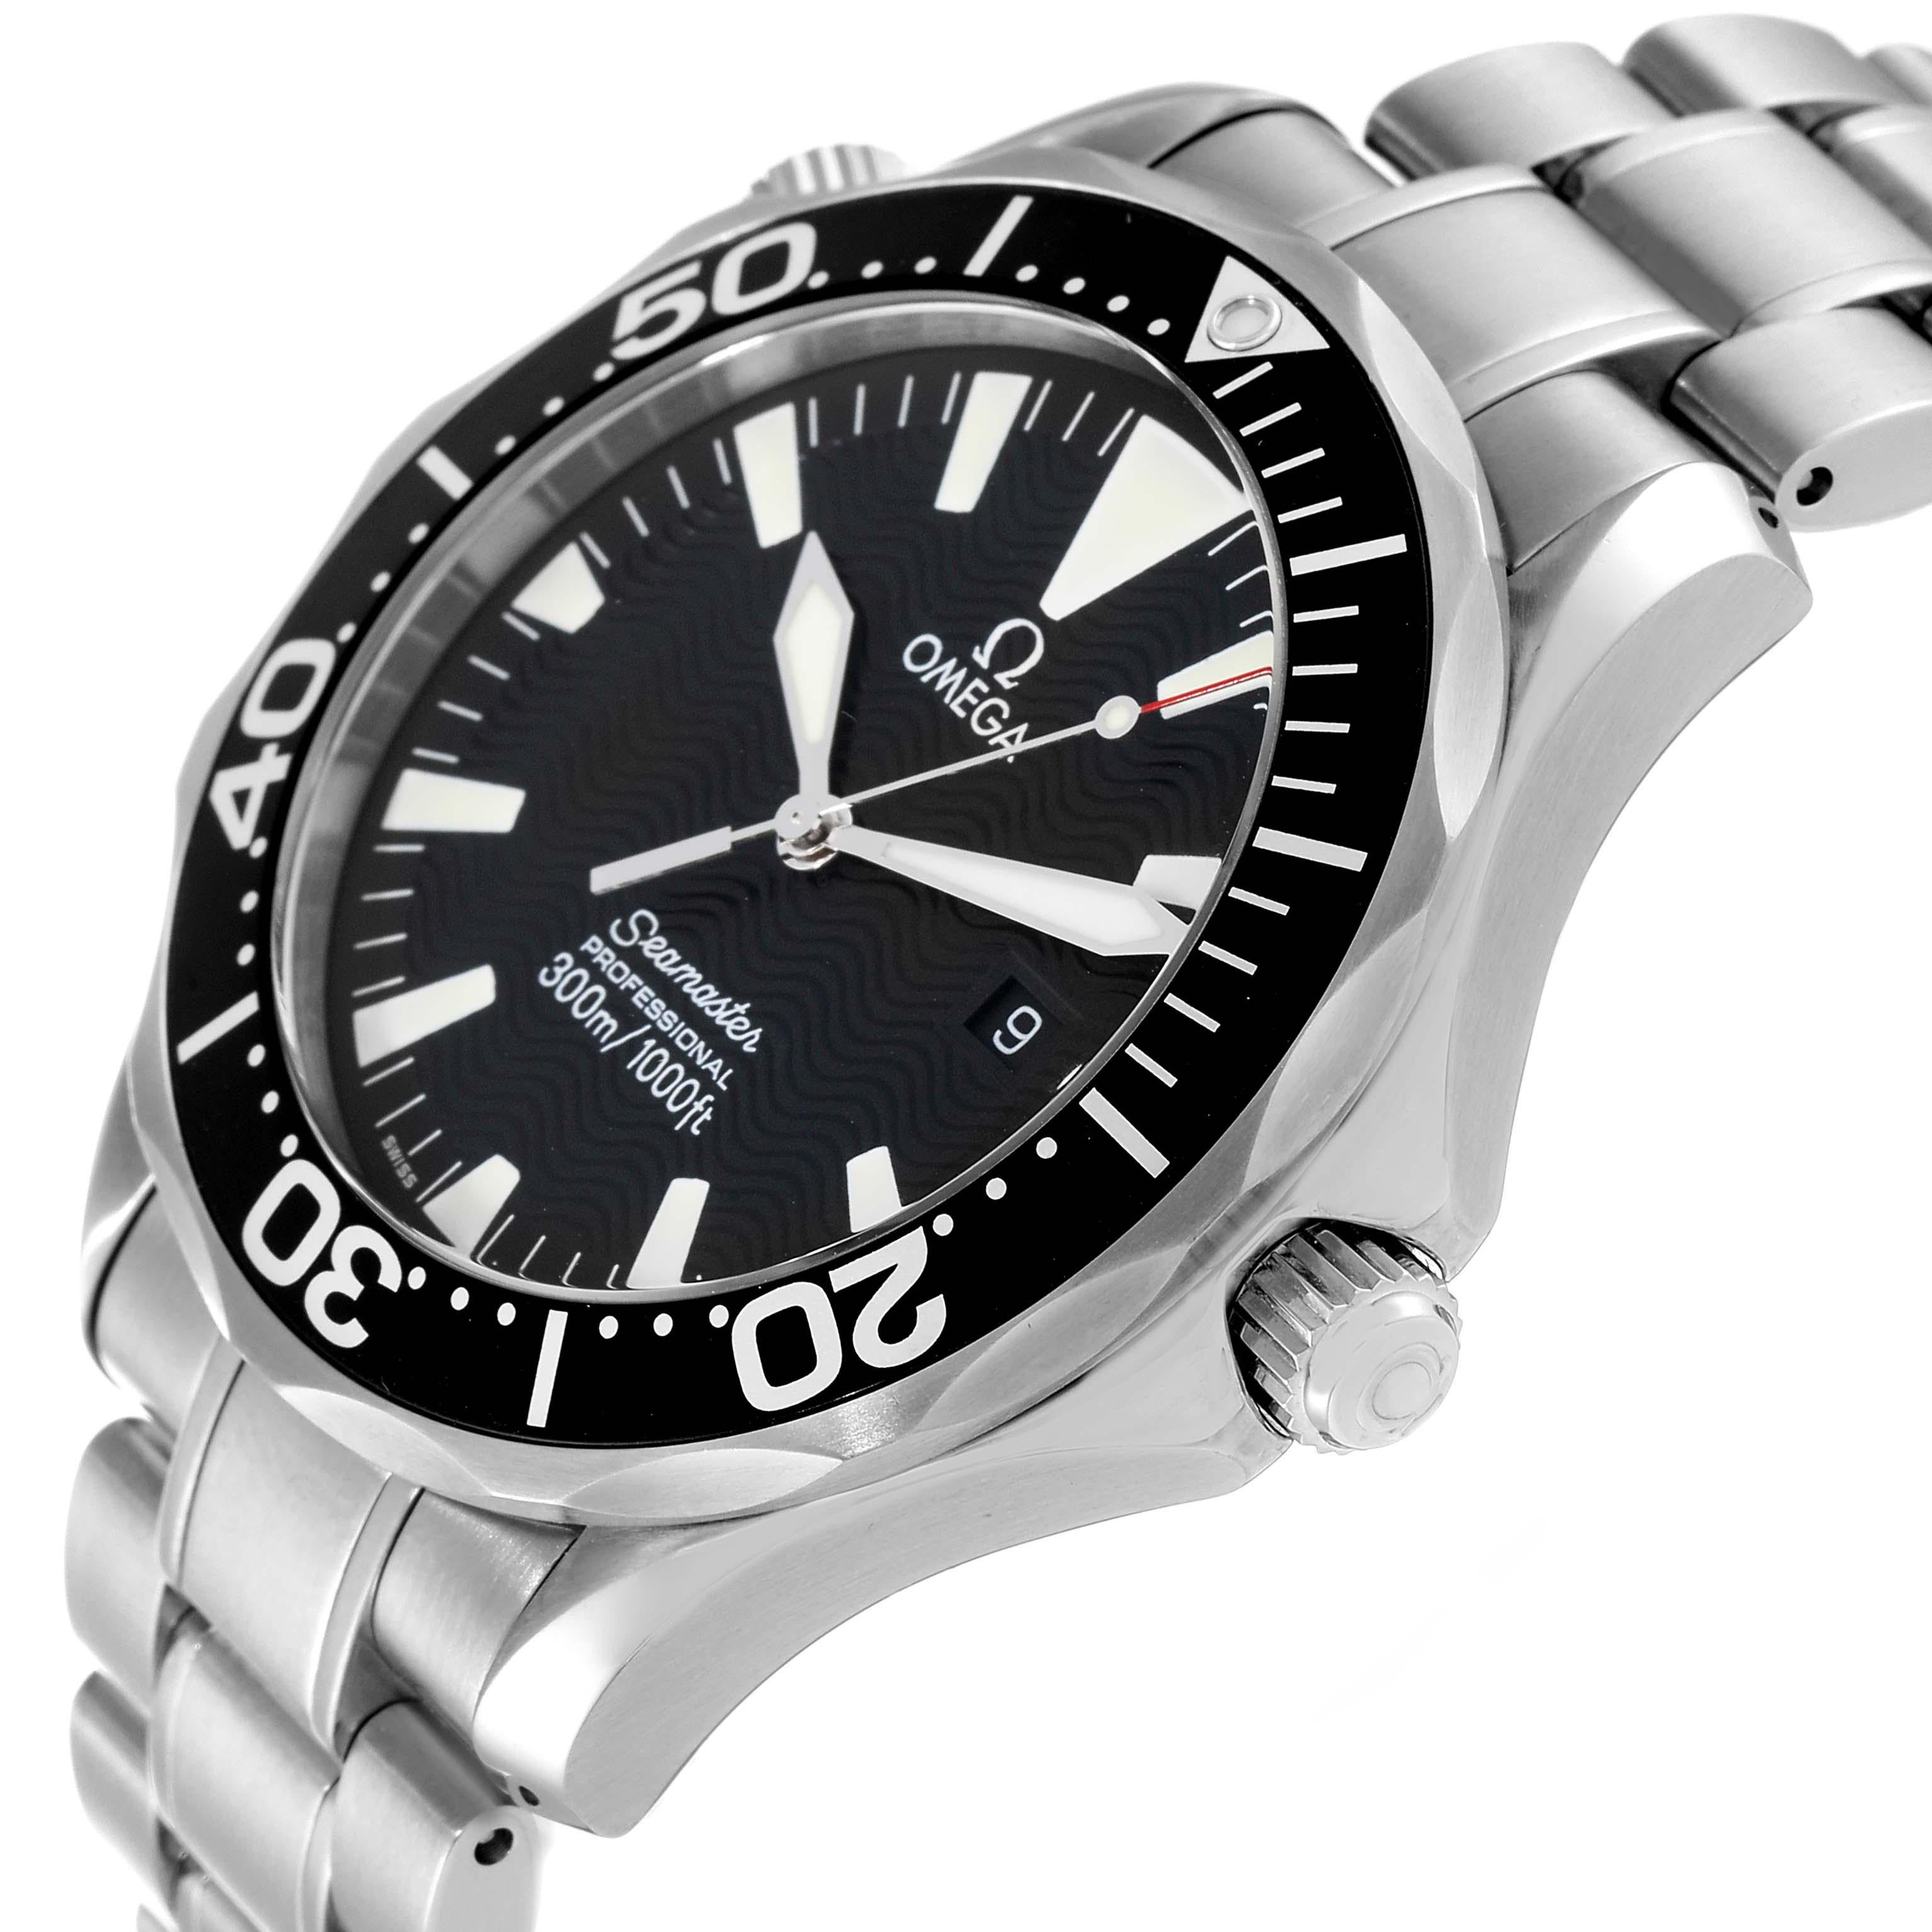 Omega Seamaster Black Dial Stainless Steel Mens Watch 2264.50.00 1